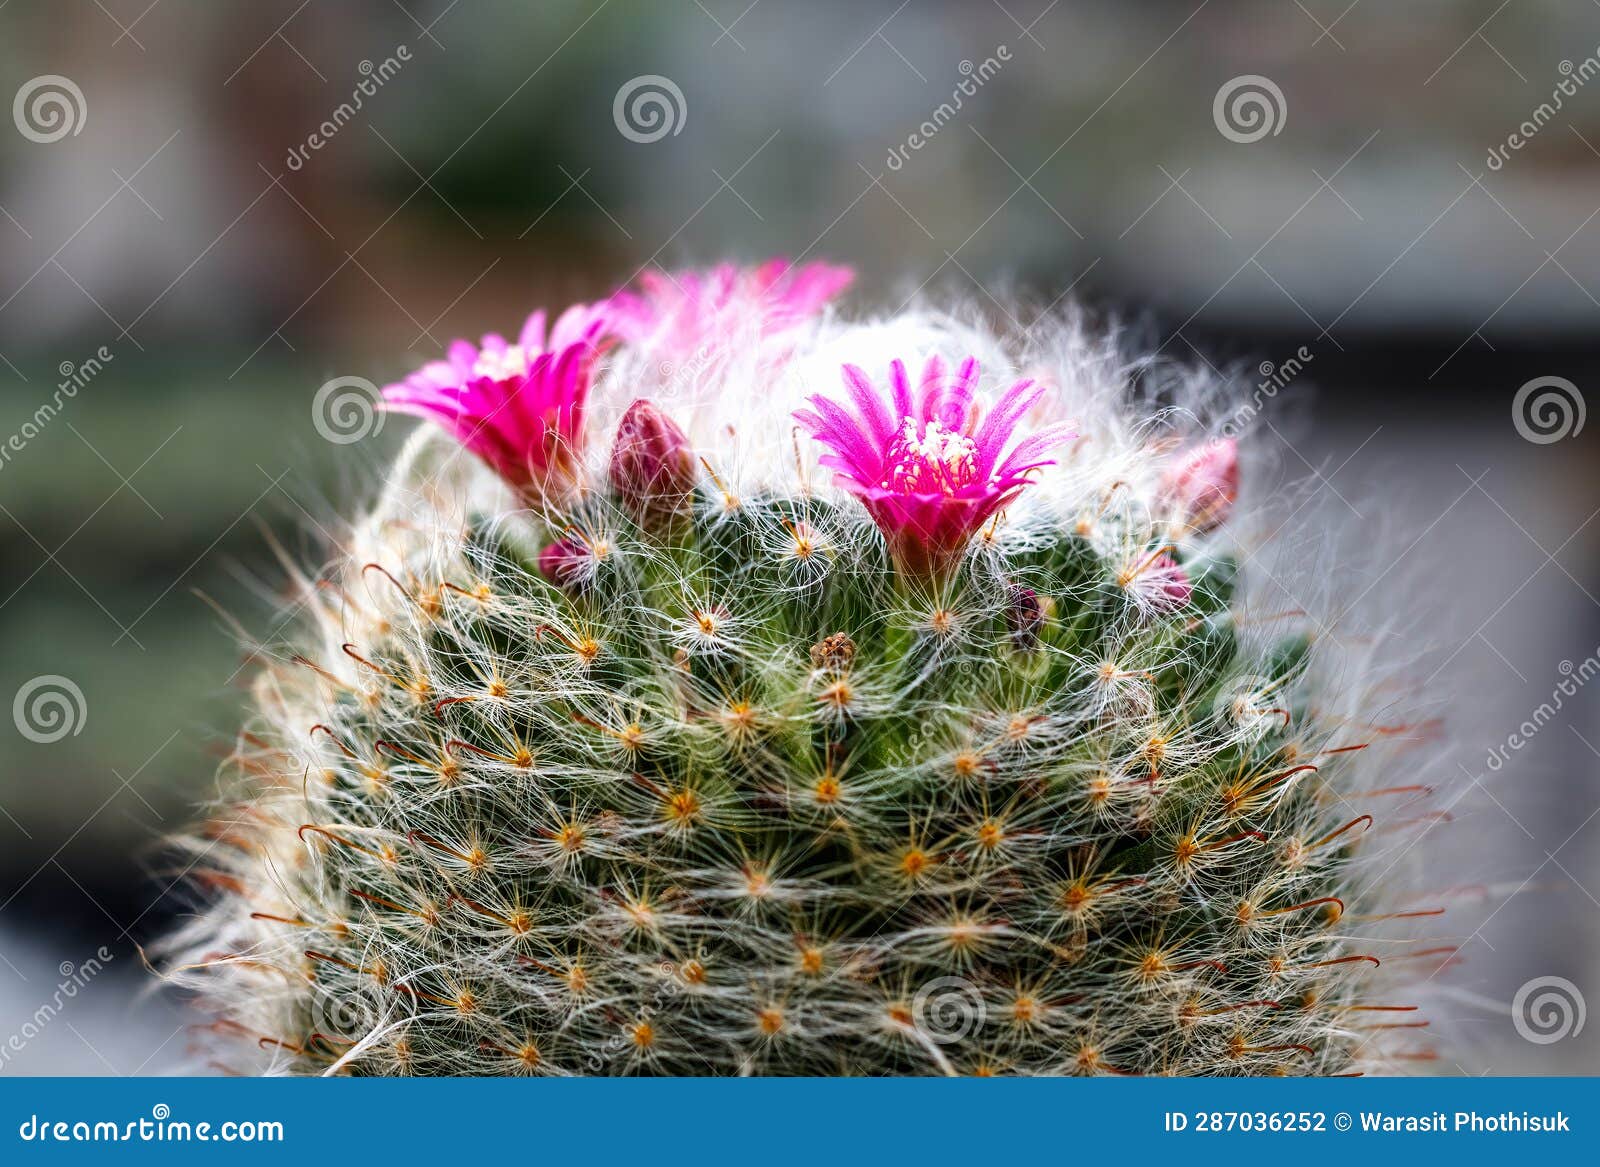 https://thumbs.dreamstime.com/z/mammillaria-benneckei-type-cactus-hook-spines-there-tuberous-propagation-clump-together-group-blooming-close-up-287036252.jpg